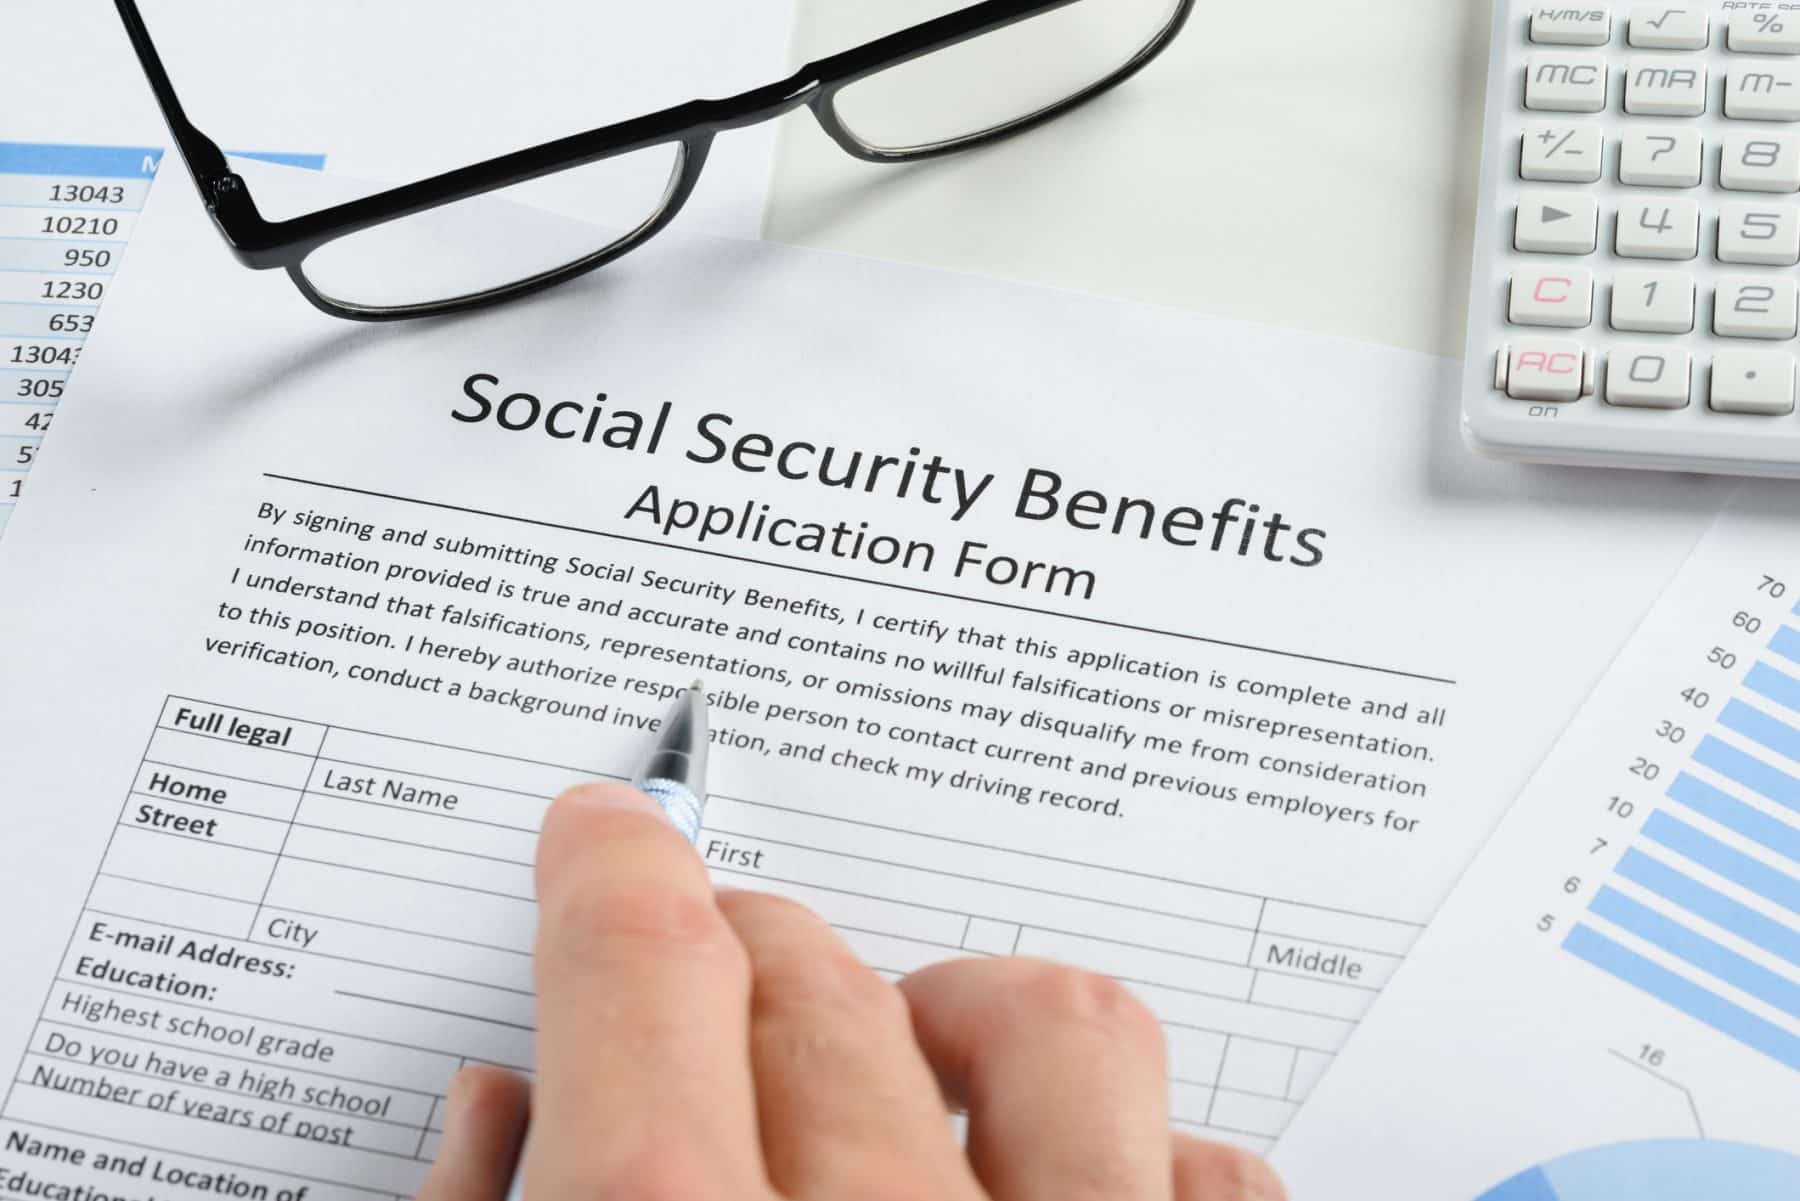 Can I Collect Social Security If I'm Not A U.S. Citizen?